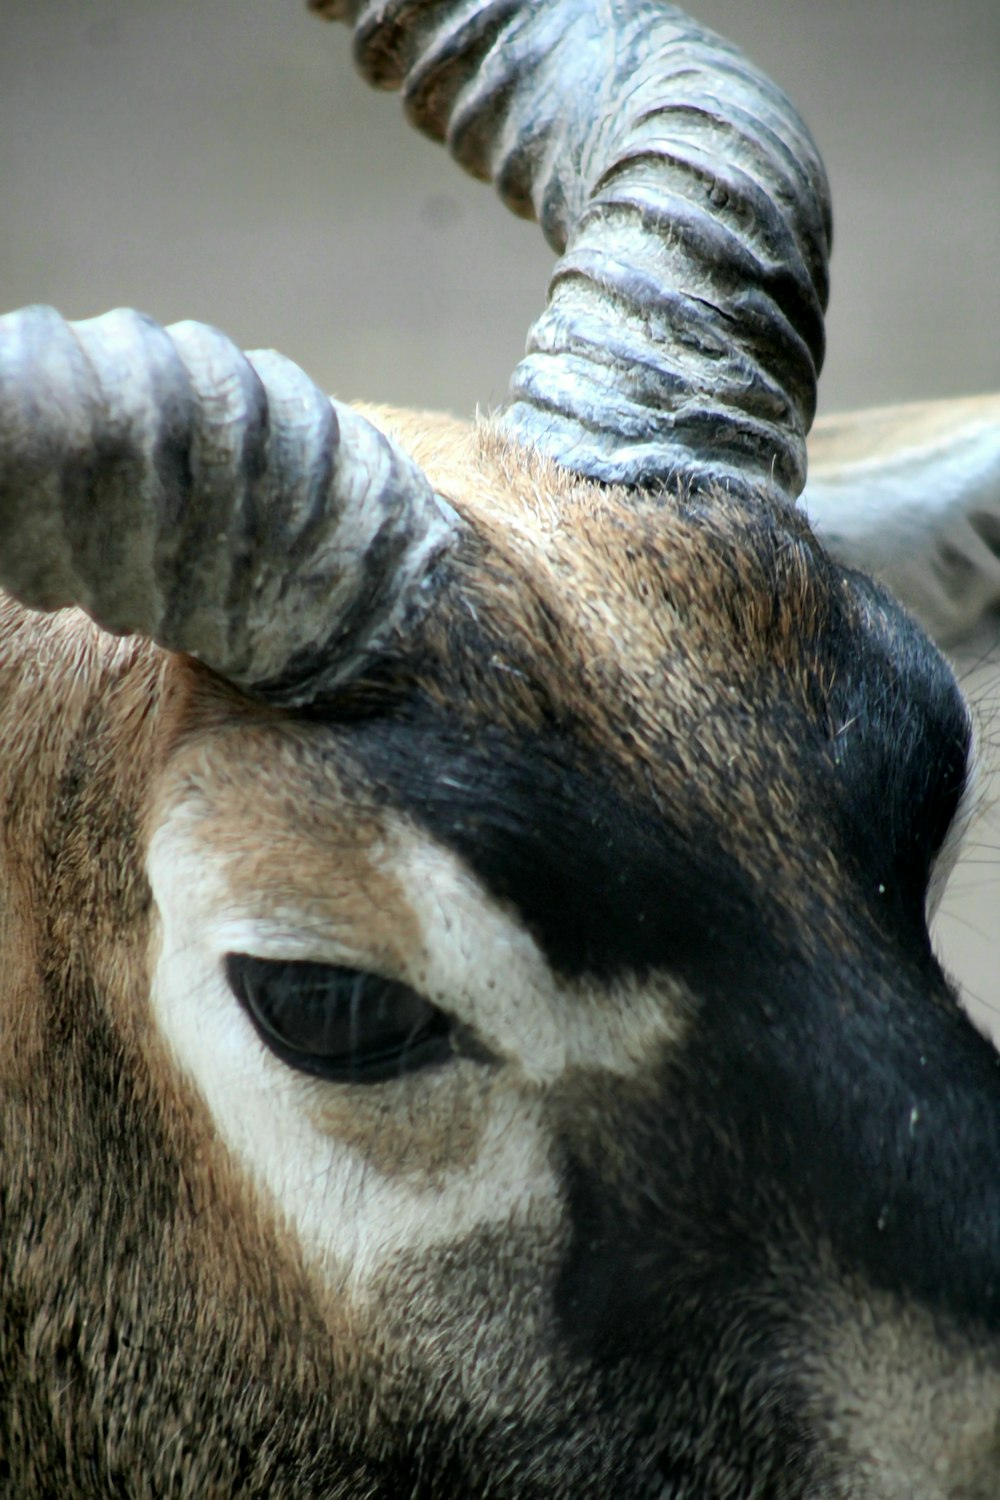 a close up of a horned animal with long horns